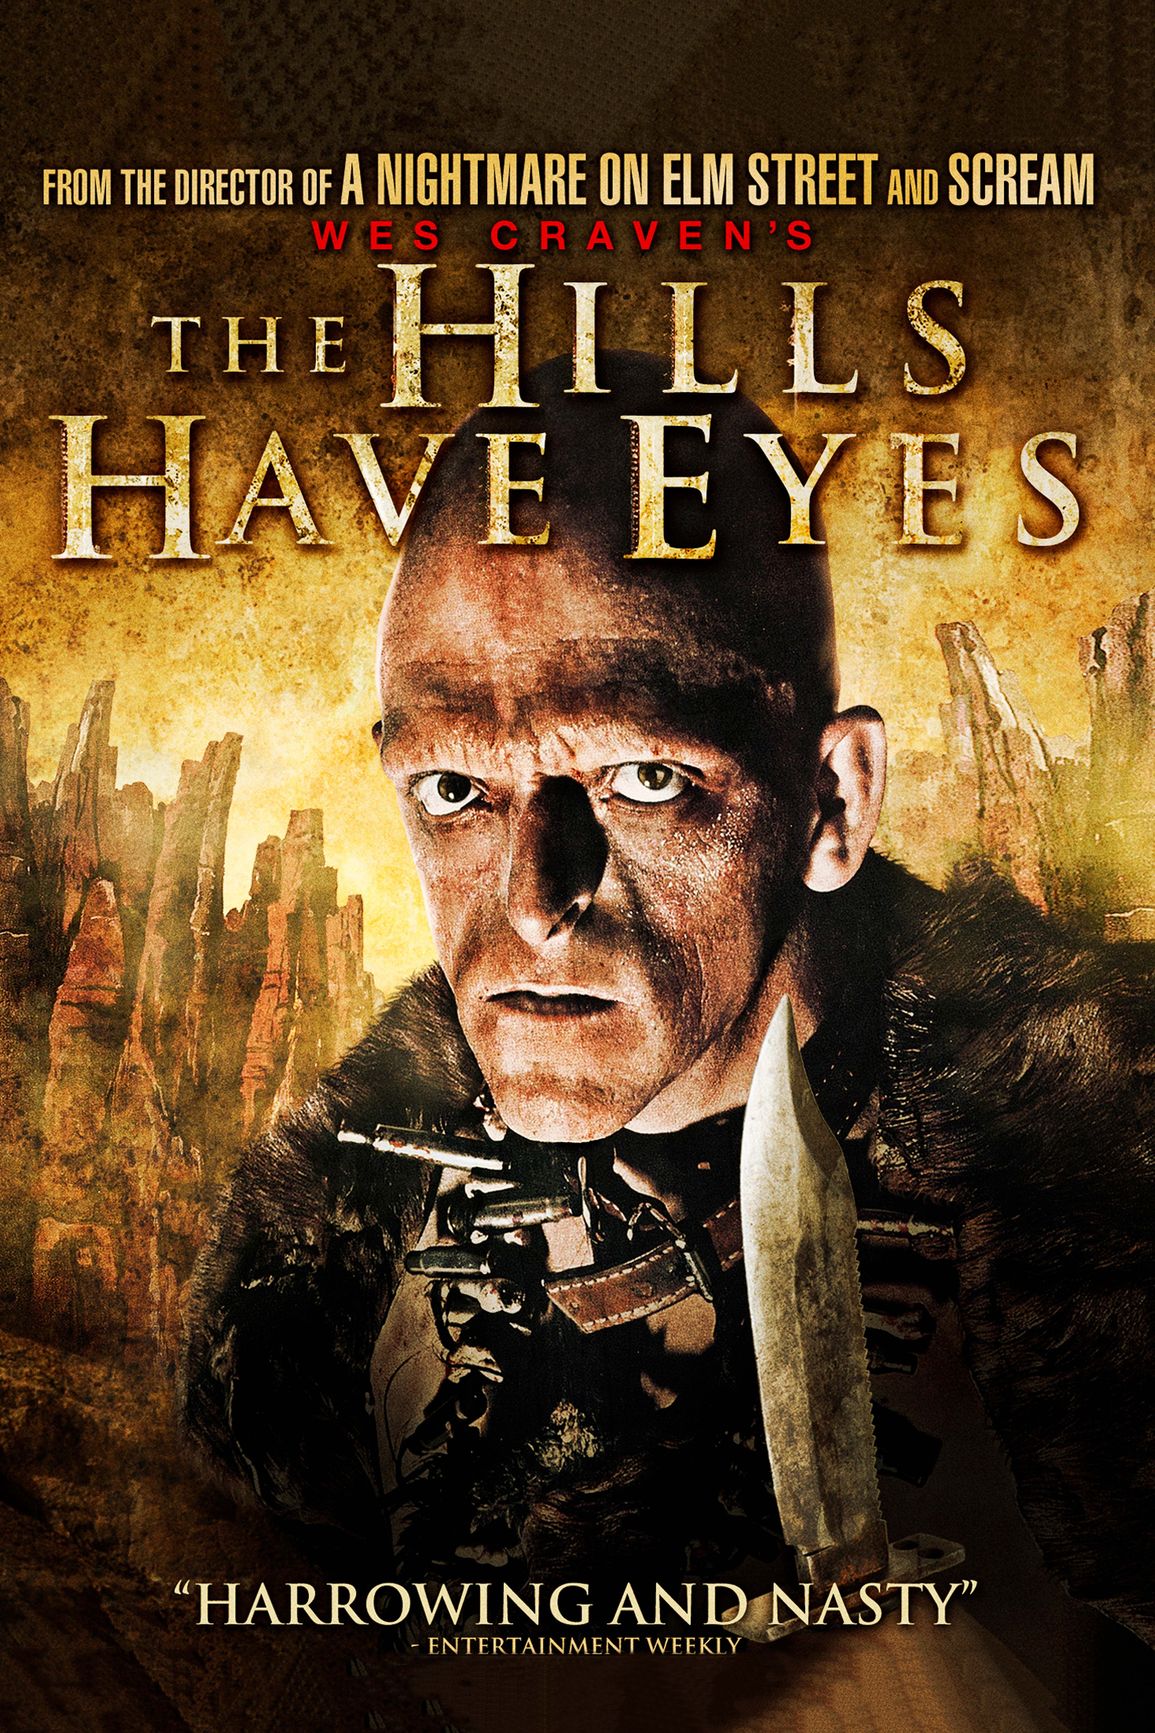 hills have eyes 1 - From The Director Of A Nightmare On Elm Street And Scream Wes Cur Aven'S The Hills Have Eyes